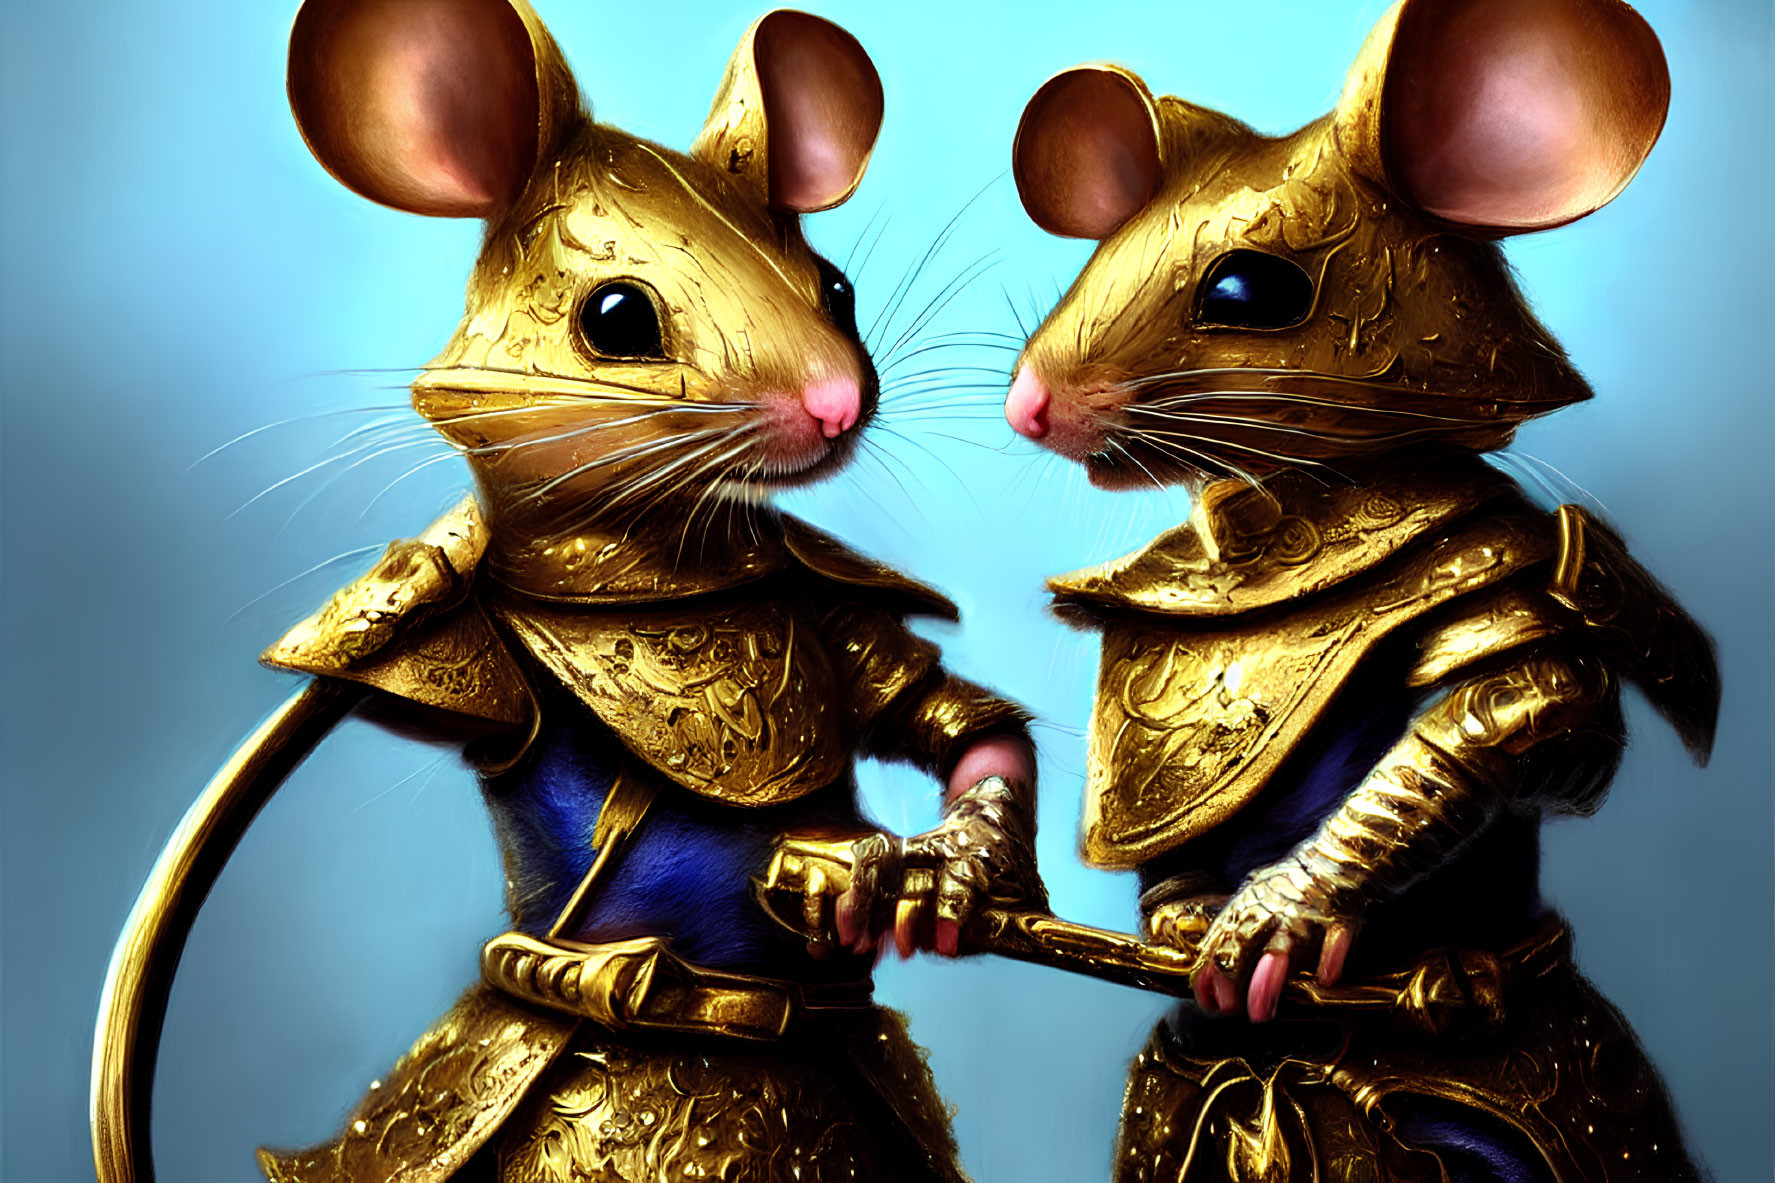 Medieval armor-clad anthropomorphic mice with sword on blue background